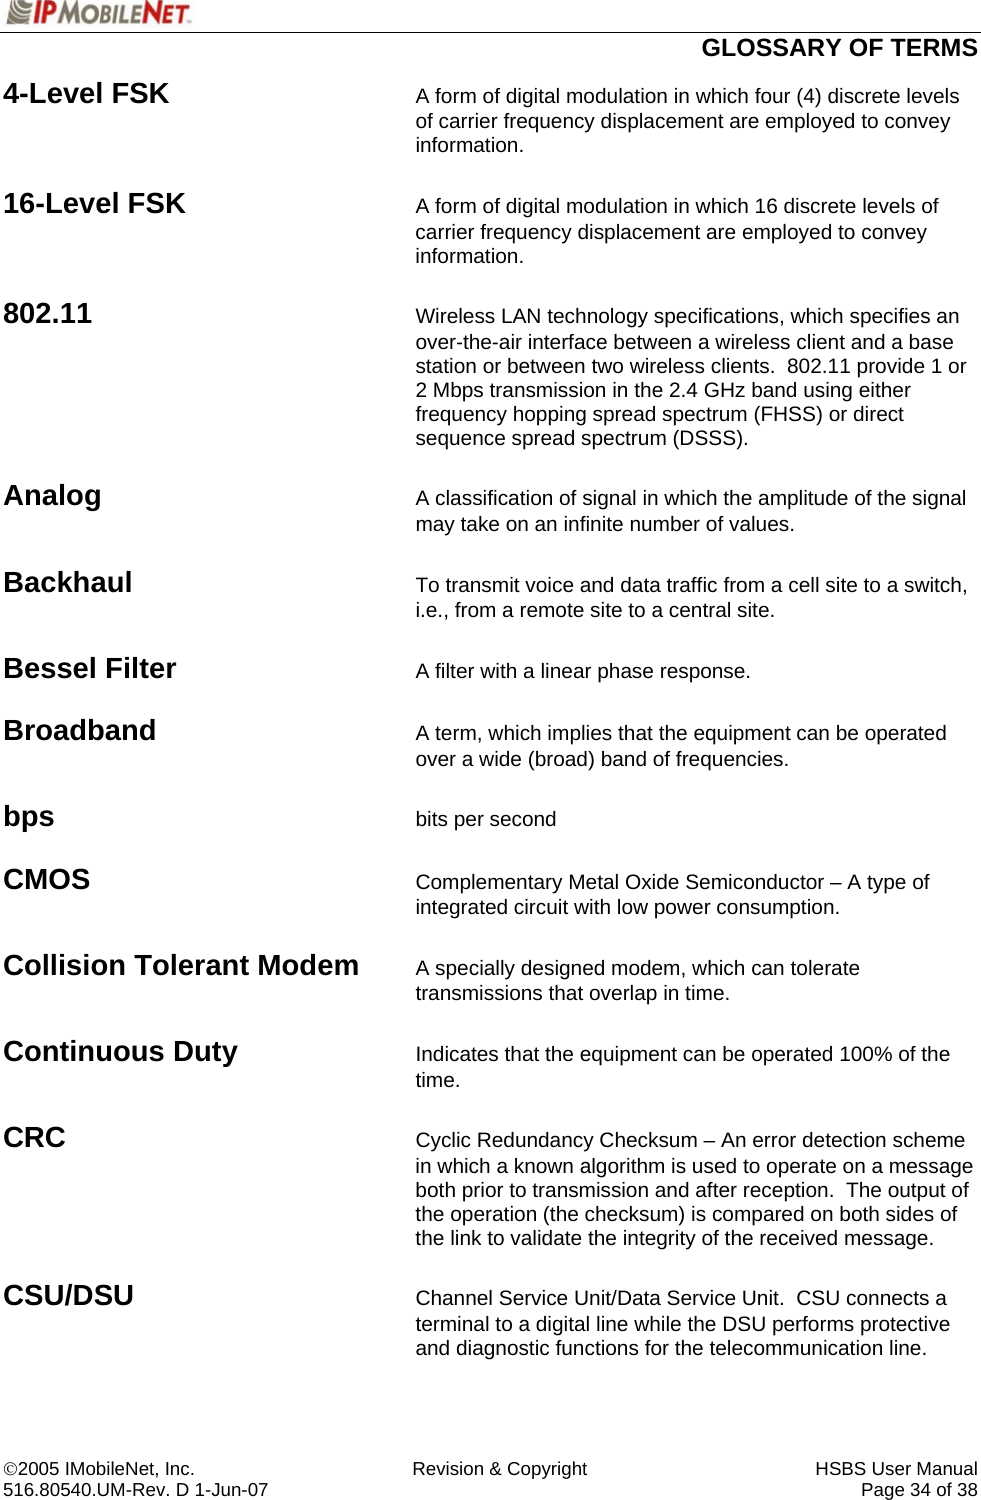  GLOSSARY OF TERMS ©2005 IMobileNet, Inc.  Revision &amp; Copyright  HSBS User Manual 516.80540.UM-Rev. D 1-Jun-07     Page 34 of 38  4-Level FSK  A form of digital modulation in which four (4) discrete levels of carrier frequency displacement are employed to convey information.  16-Level FSK  A form of digital modulation in which 16 discrete levels of carrier frequency displacement are employed to convey information.  802.11 Wireless LAN technology specifications, which specifies an over-the-air interface between a wireless client and a base station or between two wireless clients.  802.11 provide 1 or 2 Mbps transmission in the 2.4 GHz band using either frequency hopping spread spectrum (FHSS) or direct sequence spread spectrum (DSSS).   Analog A classification of signal in which the amplitude of the signal may take on an infinite number of values.  Backhaul  To transmit voice and data traffic from a cell site to a switch, i.e., from a remote site to a central site.  Bessel Filter A filter with a linear phase response.  Broadband A term, which implies that the equipment can be operated over a wide (broad) band of frequencies.  bps bits per second  CMOS Complementary Metal Oxide Semiconductor – A type of integrated circuit with low power consumption.  Collision Tolerant Modem A specially designed modem, which can tolerate transmissions that overlap in time.  Continuous Duty Indicates that the equipment can be operated 100% of the time.  CRC  Cyclic Redundancy Checksum – An error detection scheme in which a known algorithm is used to operate on a message both prior to transmission and after reception.  The output of the operation (the checksum) is compared on both sides of the link to validate the integrity of the received message.  CSU/DSU Channel Service Unit/Data Service Unit.  CSU connects a terminal to a digital line while the DSU performs protective and diagnostic functions for the telecommunication line.  